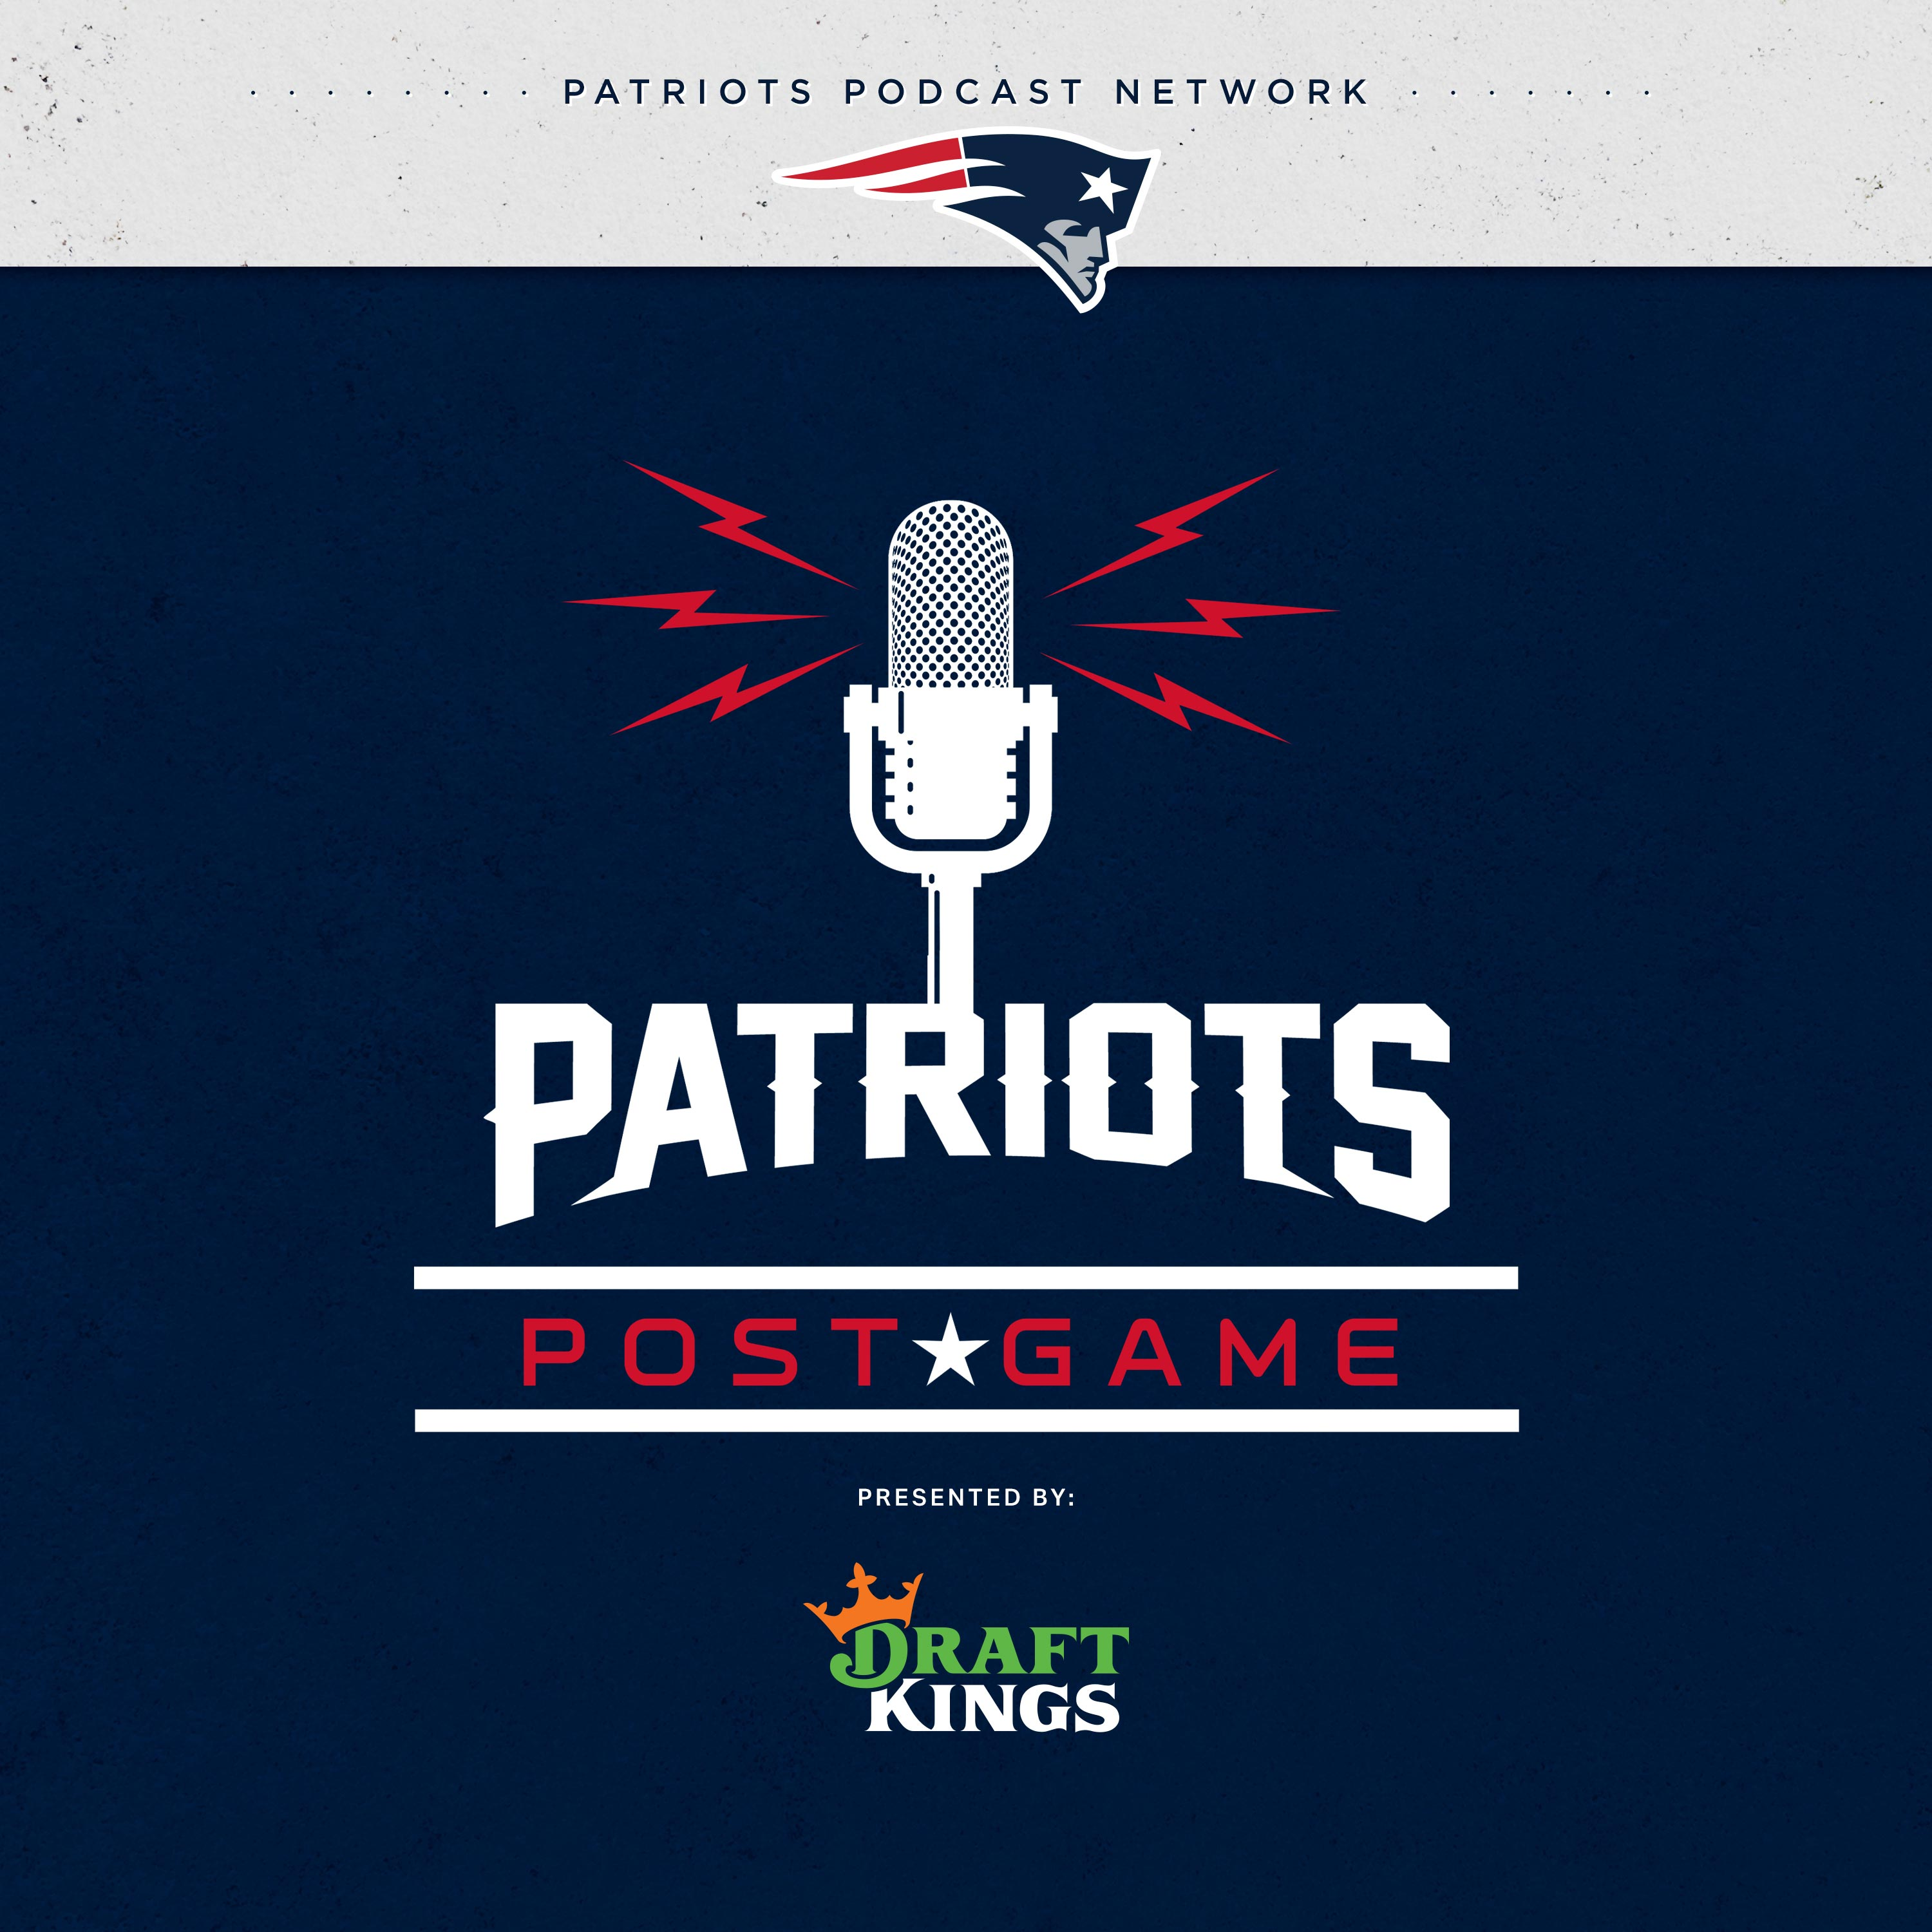 Patriots Postgame Show 10/1: Analysis of Loss to the Cowboys, Injury Updates, Around the AFC East